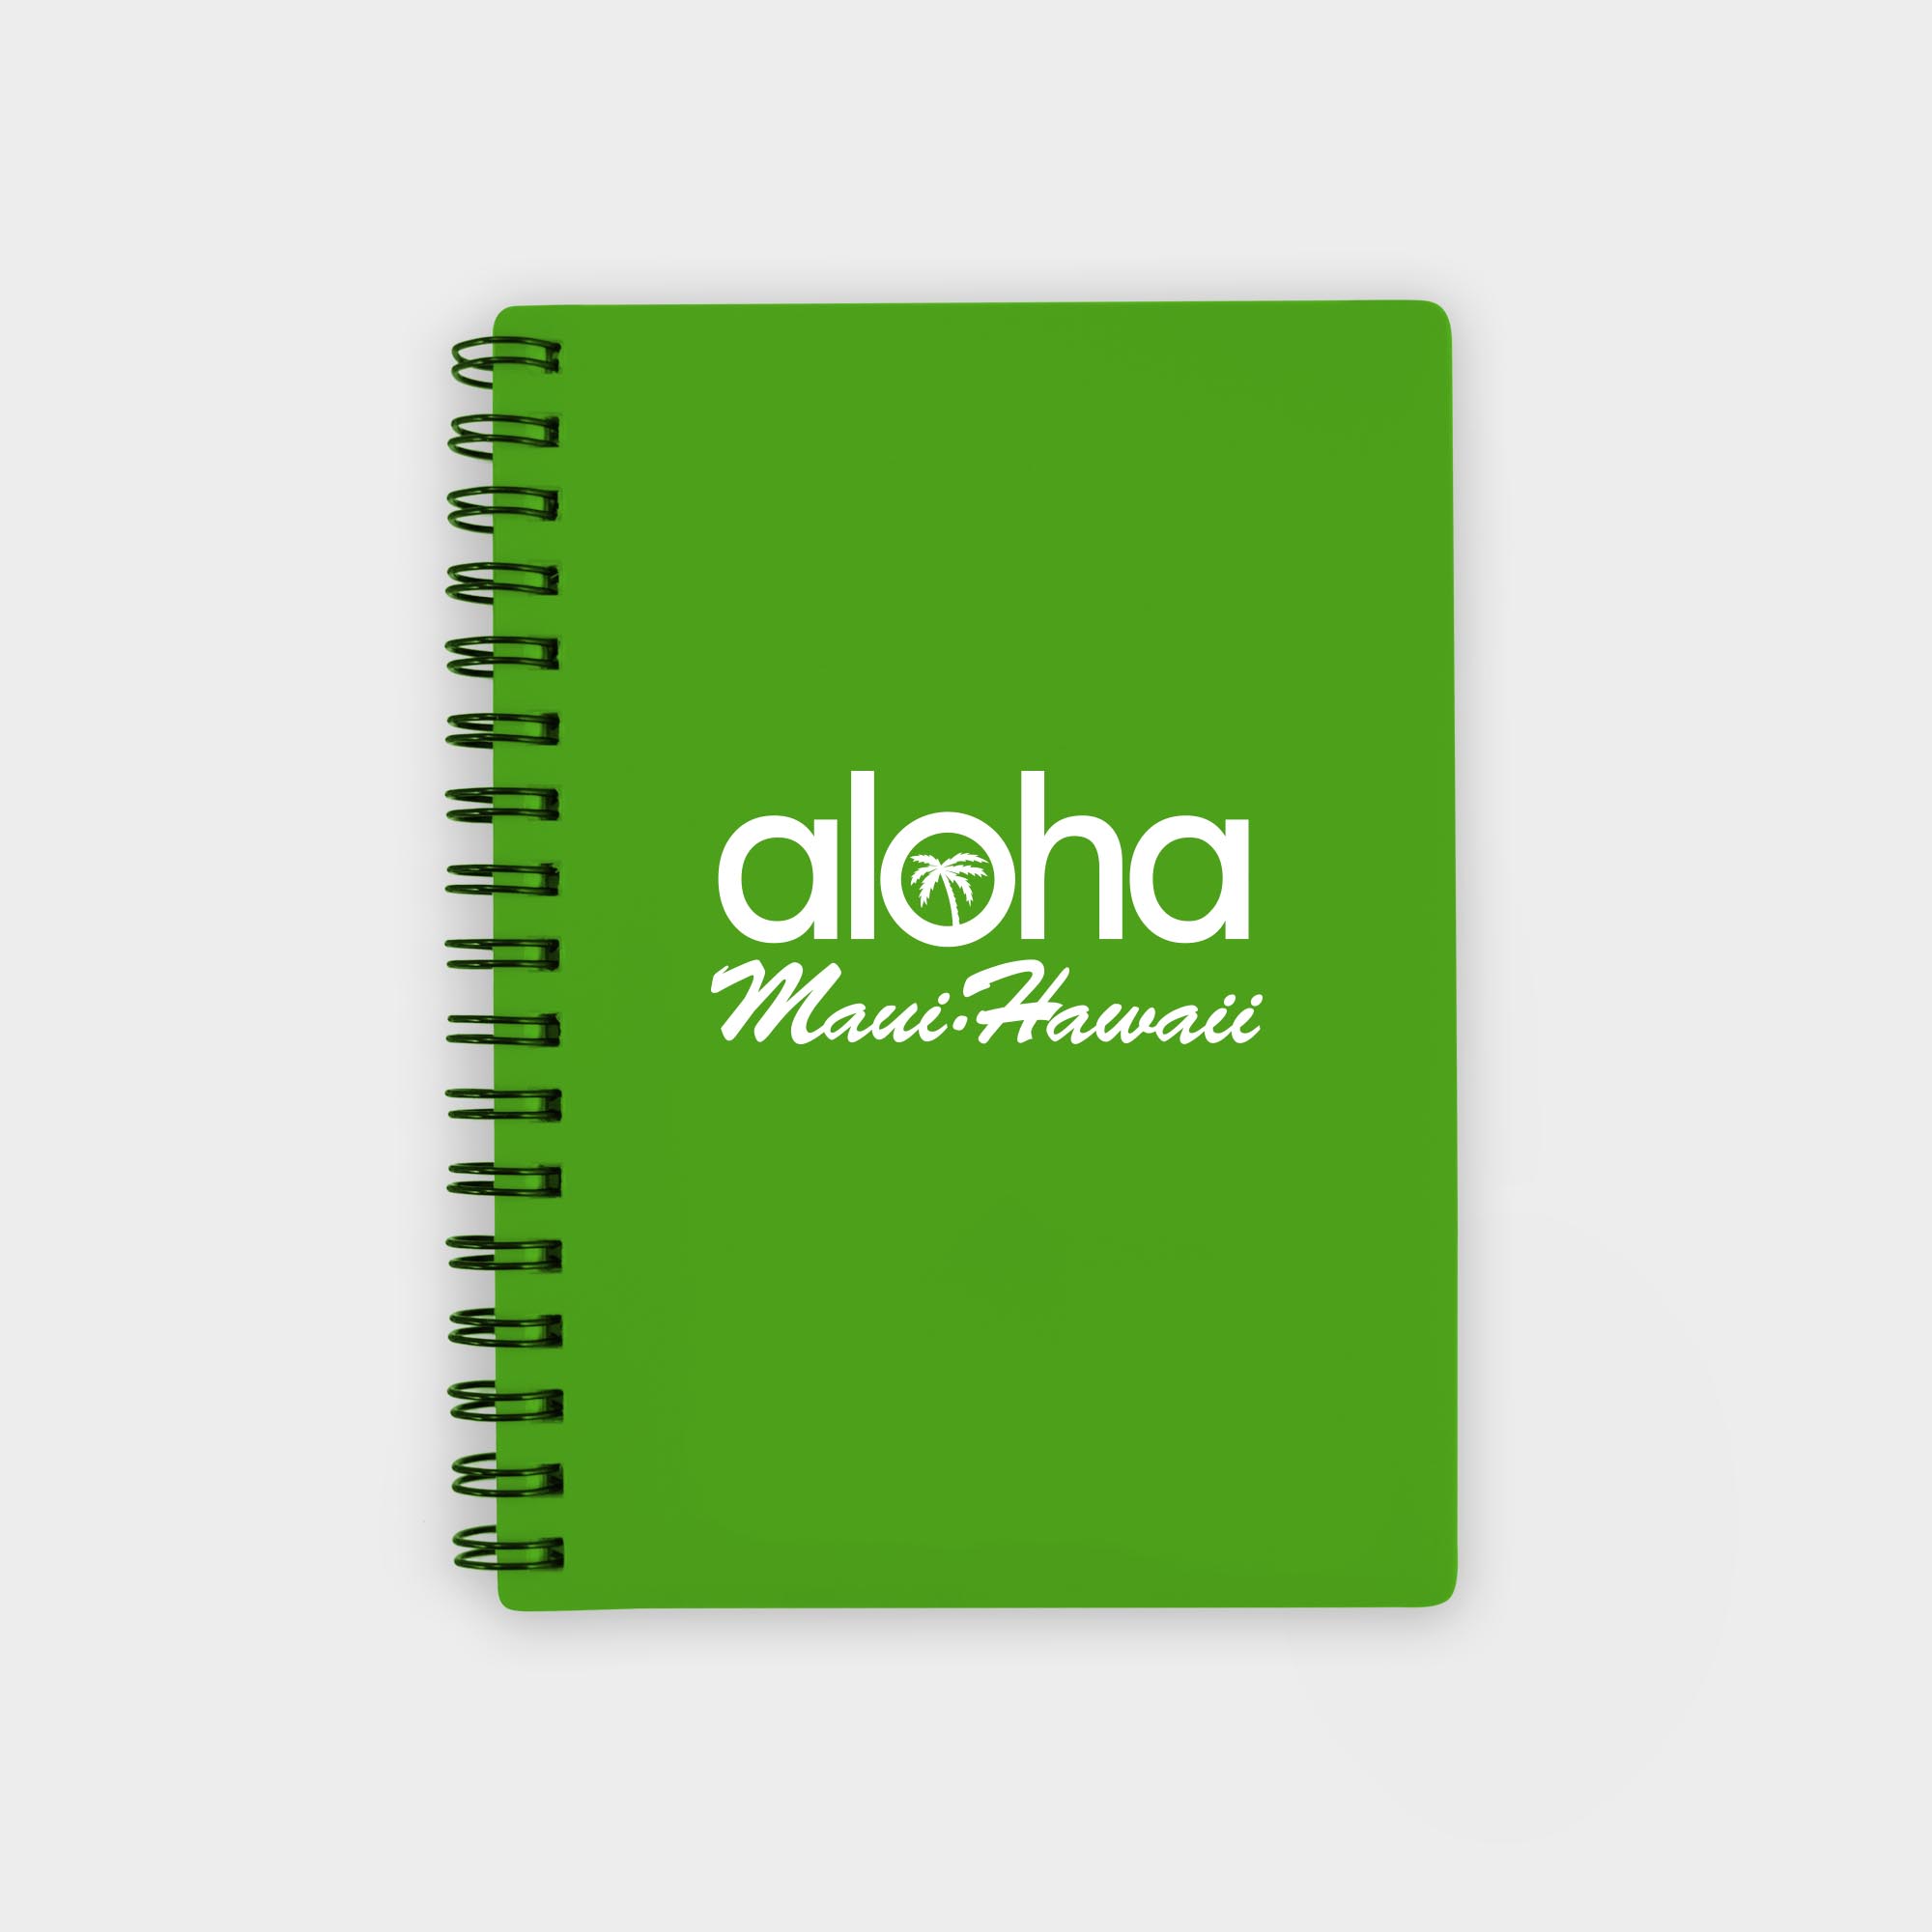 The Green & Good Polypropylene Notebook comes with recycled paper - size A6. The front and back cover is made from recycled polypropylene (500 microns), the sheets are 80gsm. Comes wirebound with 50 sheets as standard. Please contact us if you require a bespoke number of sheets. Green